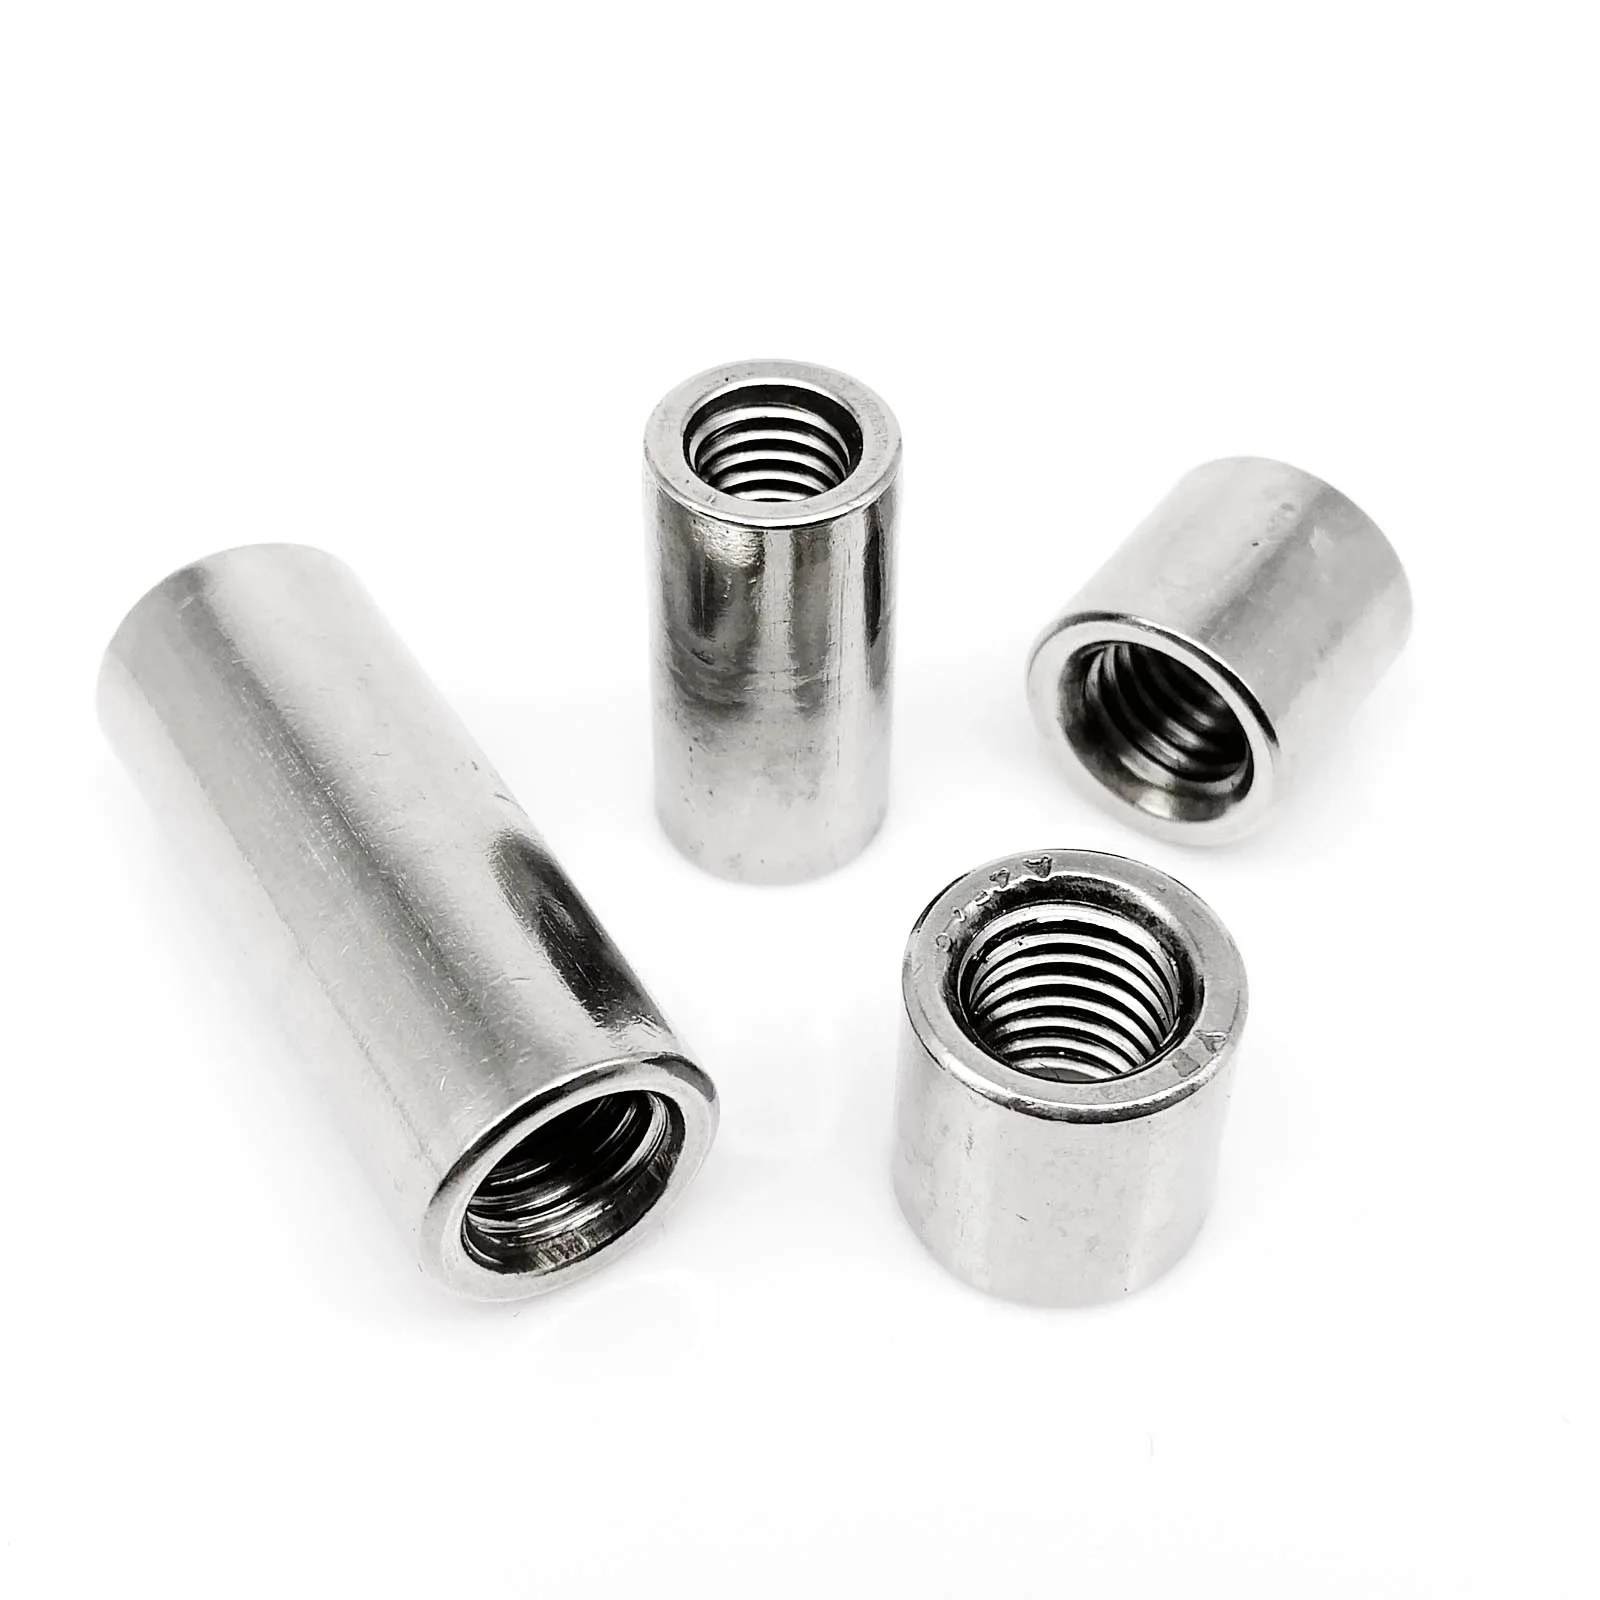 Details about   Threaded Rod Connector M3 M4 M5 M6 M8 M10 M12 M14 Round Nuts A2 Stainless Steel 